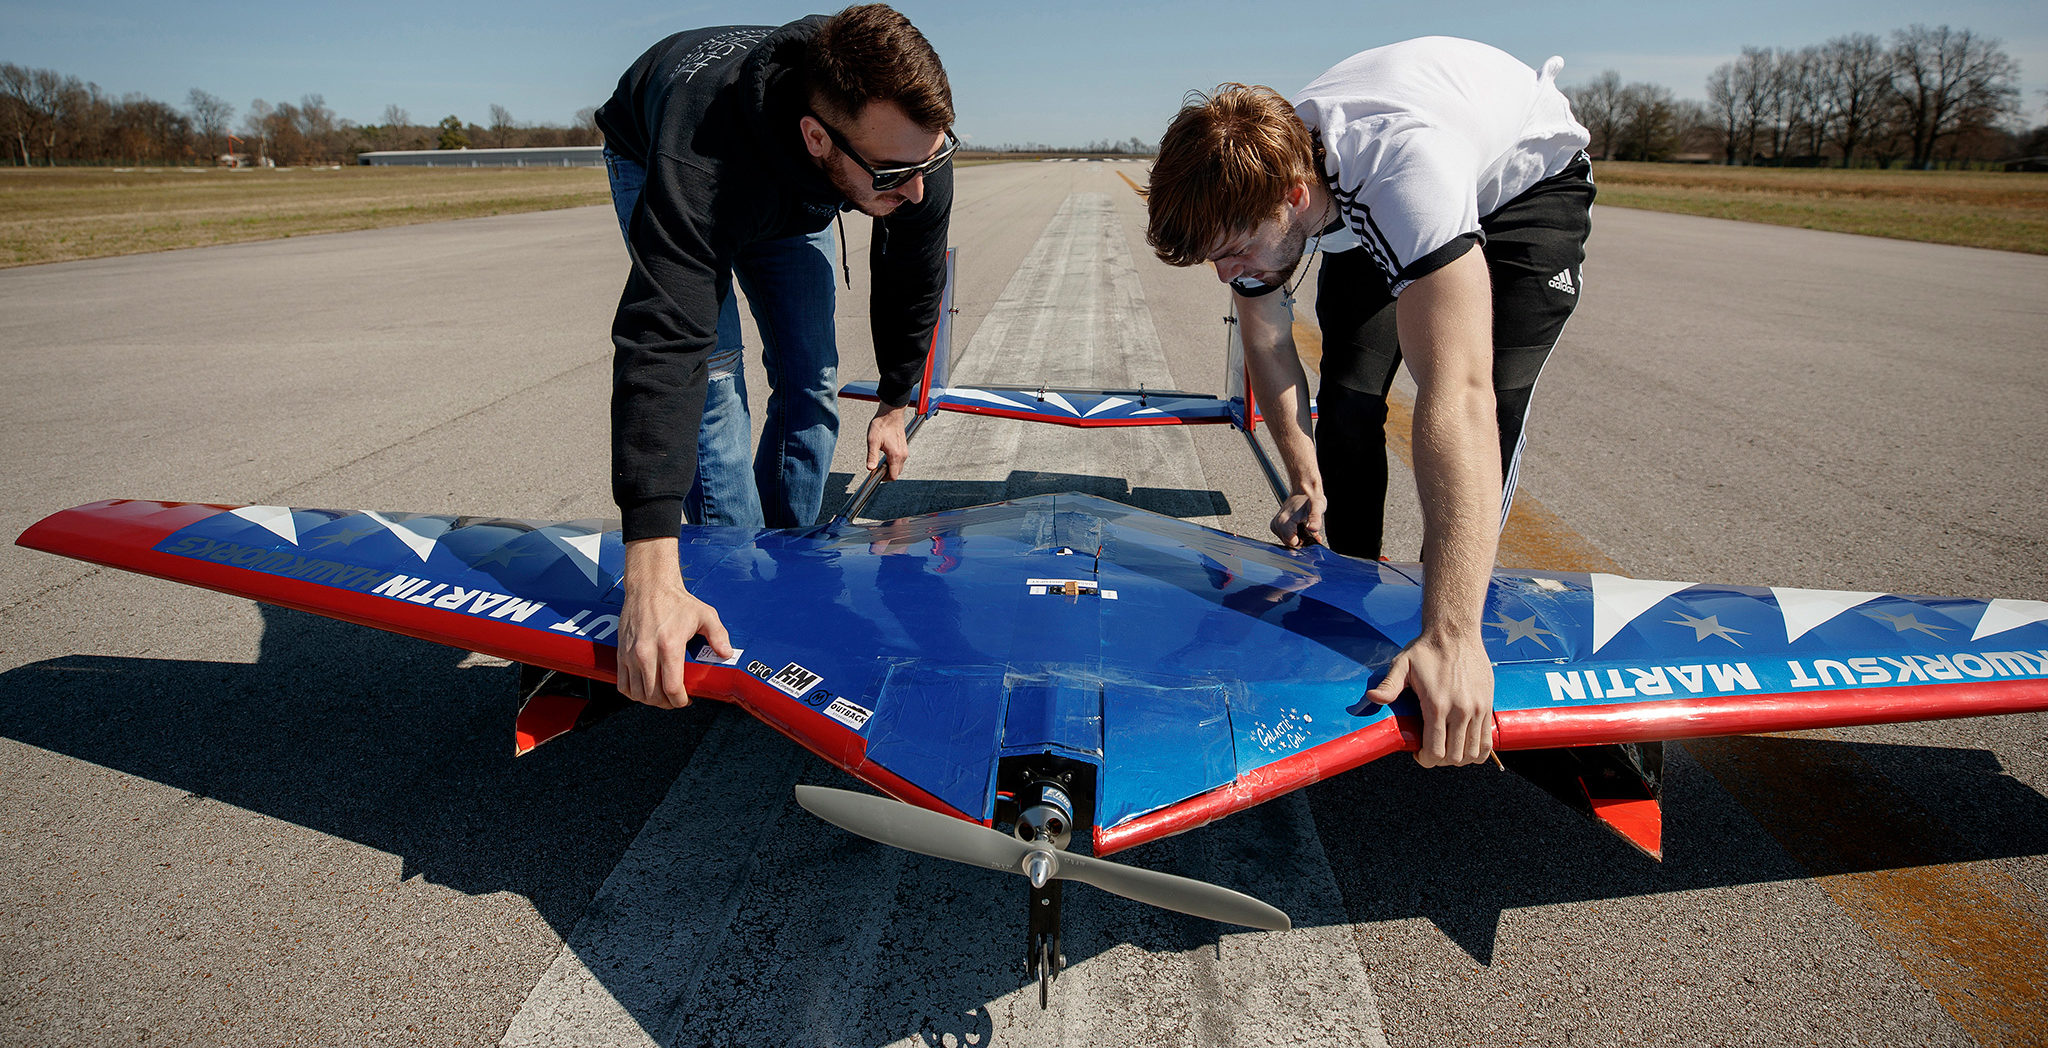 Two young men position a small aircraft on a test runway